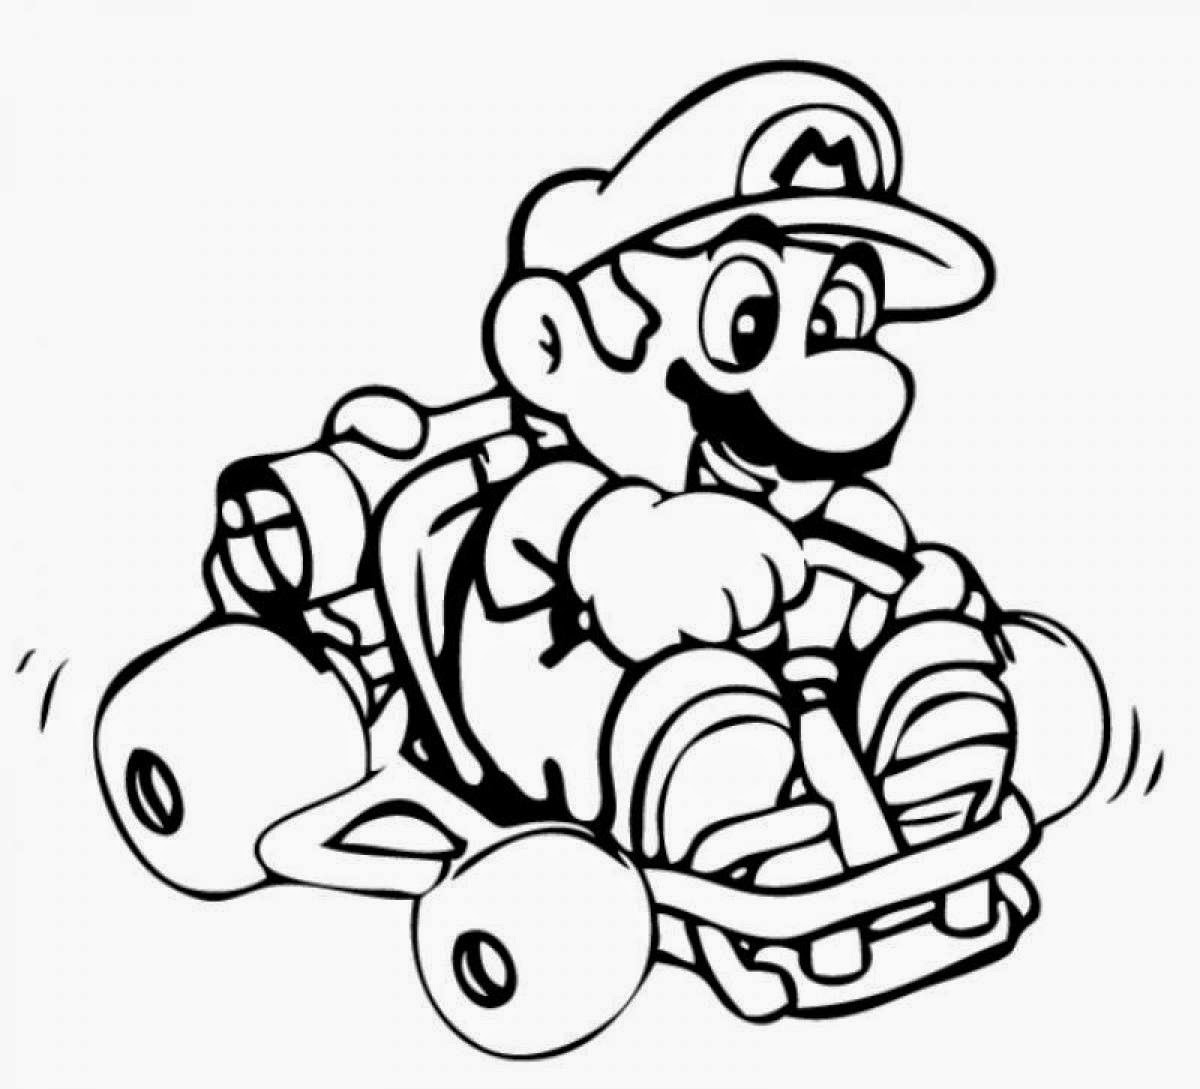 Mario Coloring Pages For Boys
 Coloring Pages Mario Coloring Pages Free and Printable